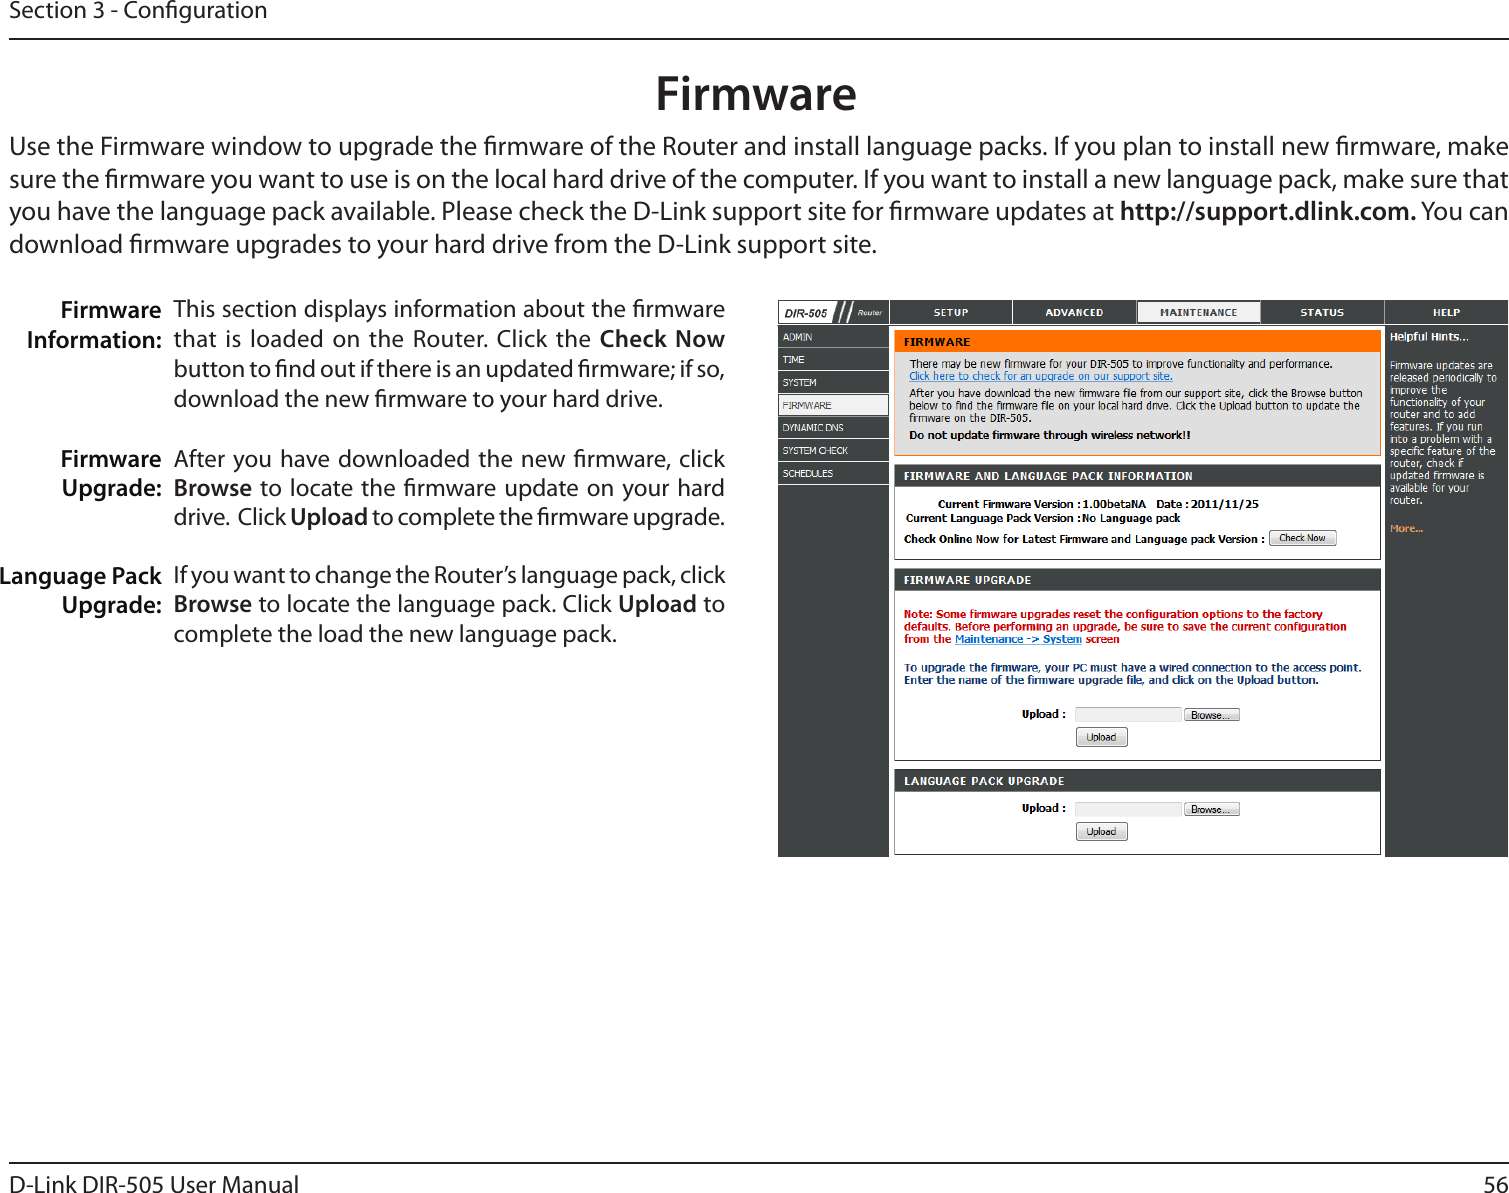 56D-Link DIR-505 User ManualSection 3 - CongurationFirmwareThis section displays information about the rmware that is loaded on  the Router. Click the  Check Now button to nd out if there is an updated rmware; if so, download the new rmware to your hard drive.After you have downloaded the  new rmware, click Browse to locate the rmware update on your hard drive.  Click Upload to complete the rmware upgrade.If you want to change the Router’s language pack, click Browse to locate the language pack. Click Upload to complete the load the new language pack.Firmware Information:Firmware Upgrade:Language Pack Upgrade:Use the Firmware window to upgrade the rmware of the Router and install language packs. If you plan to install new rmware, make sure the rmware you want to use is on the local hard drive of the computer. If you want to install a new language pack, make sure that you have the language pack available. Please check the D-Link support site for rmware updates at http://support.dlink.com. You can download rmware upgrades to your hard drive from the D-Link support site.